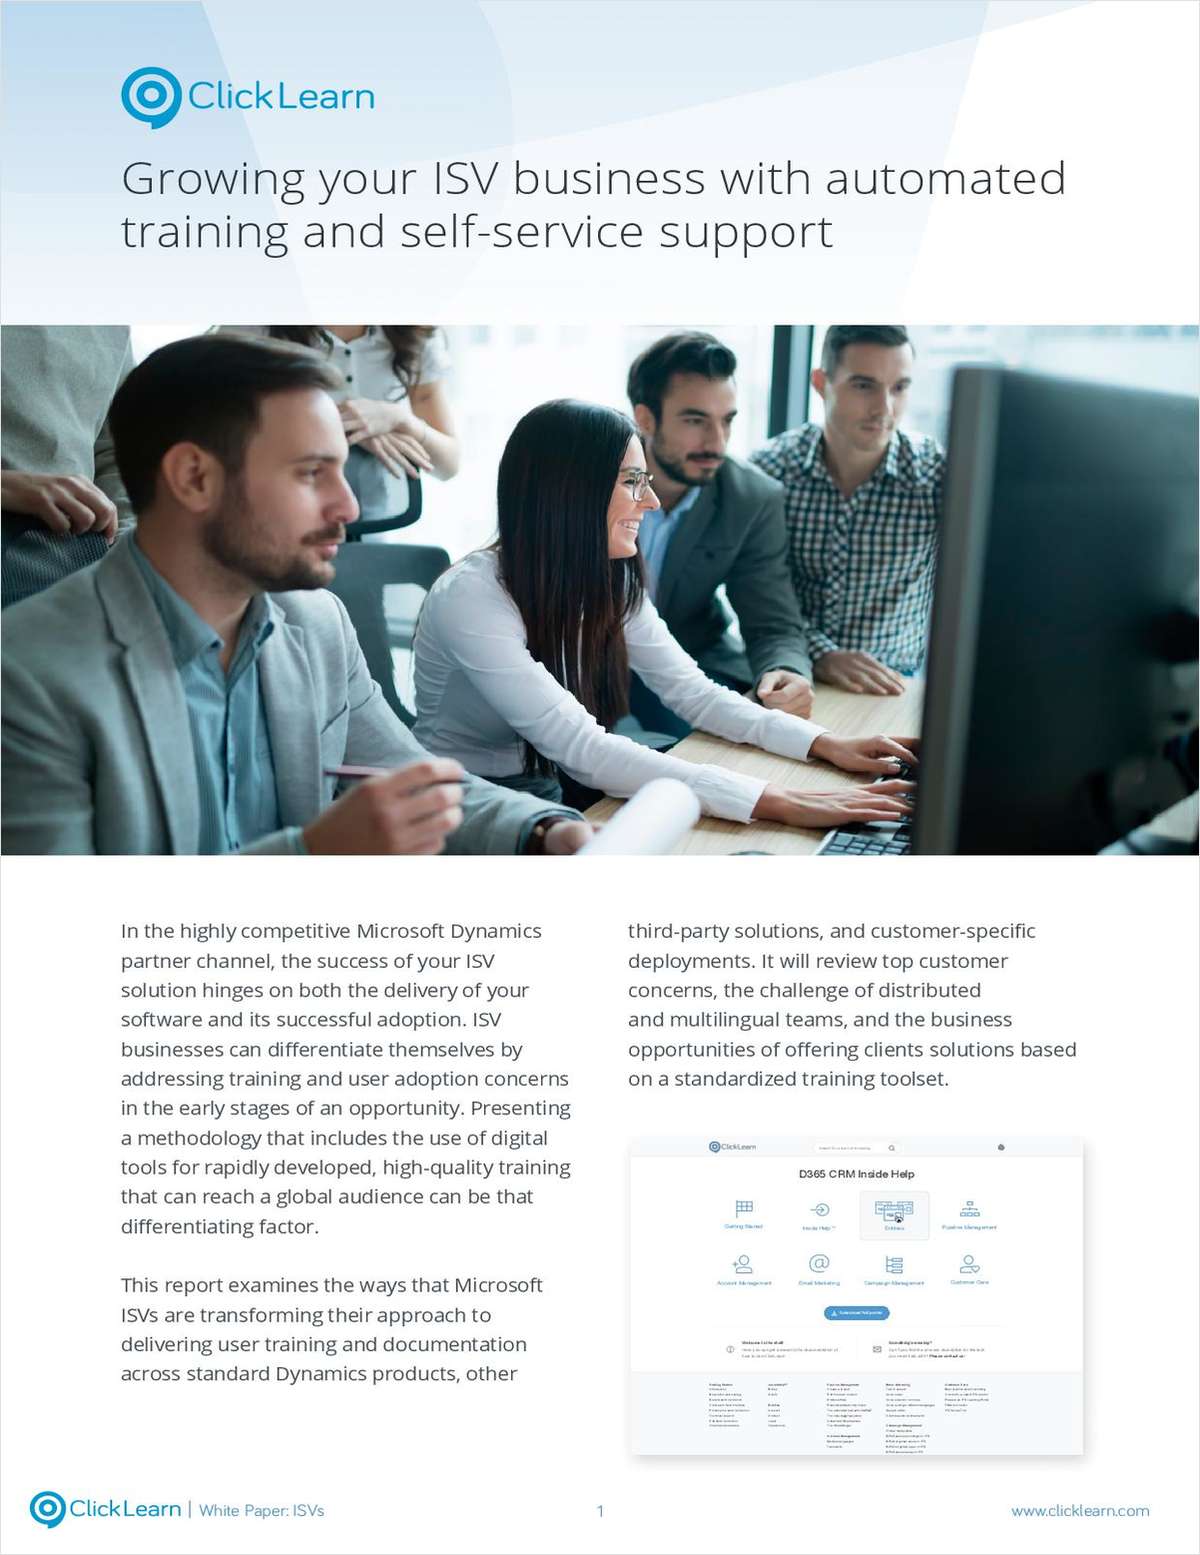 Growing your ISV solution with automated training and self-service support